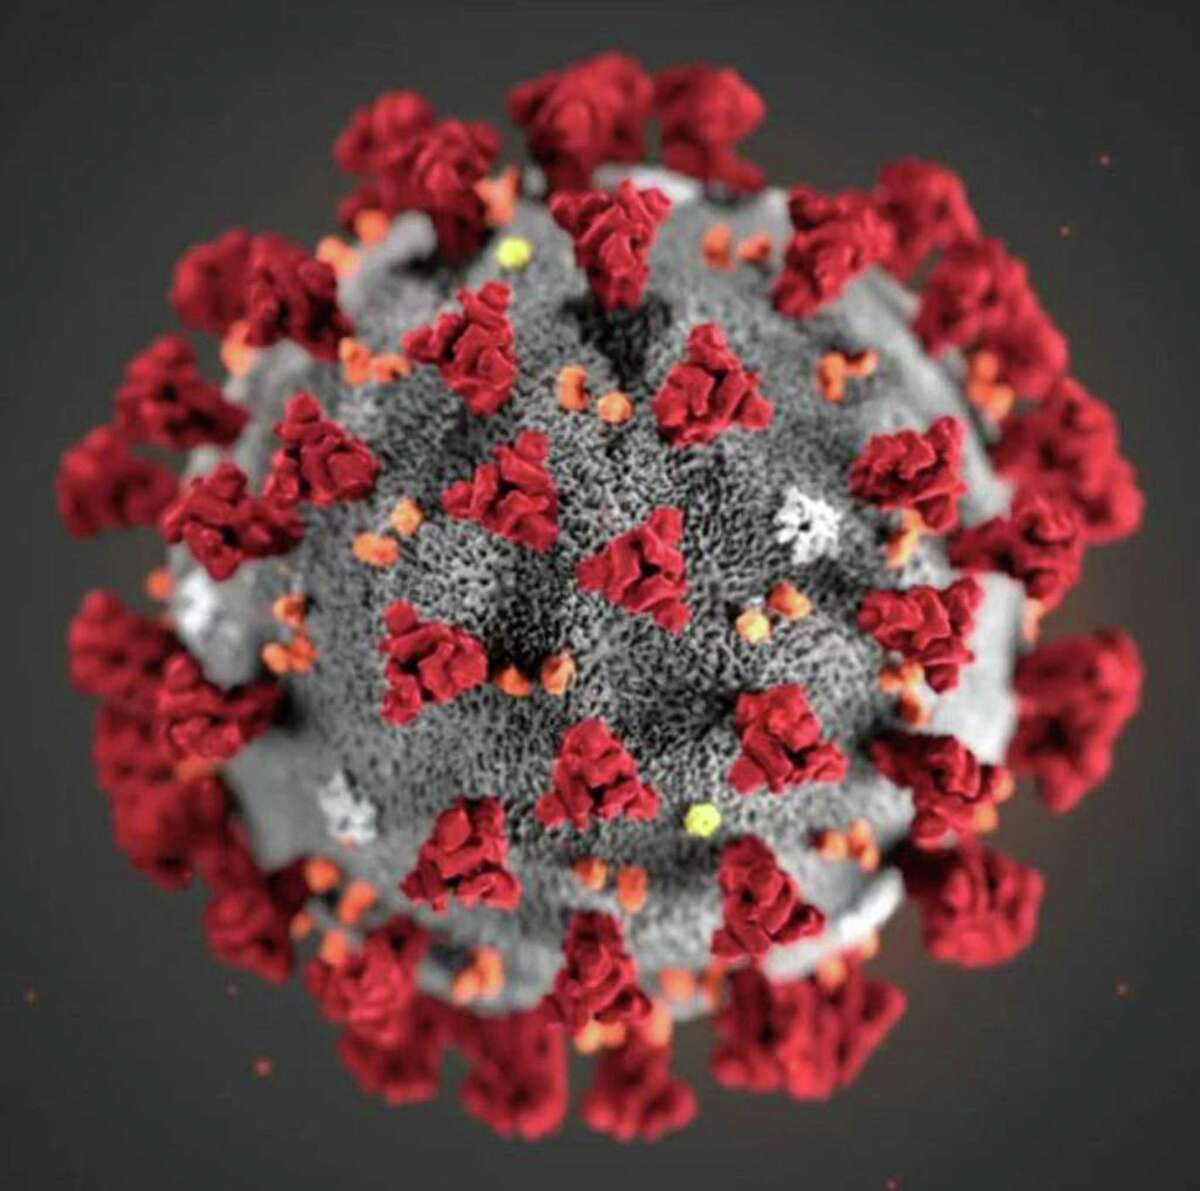 A COVID-19 particle is pictured in this image provided by the CDC. A study published in the Lanced medical journal examined the case of a man who became infected with two different variants of the SARS-CoV-2 virus in less than two months. (Centers for Disease Control and Prevention)